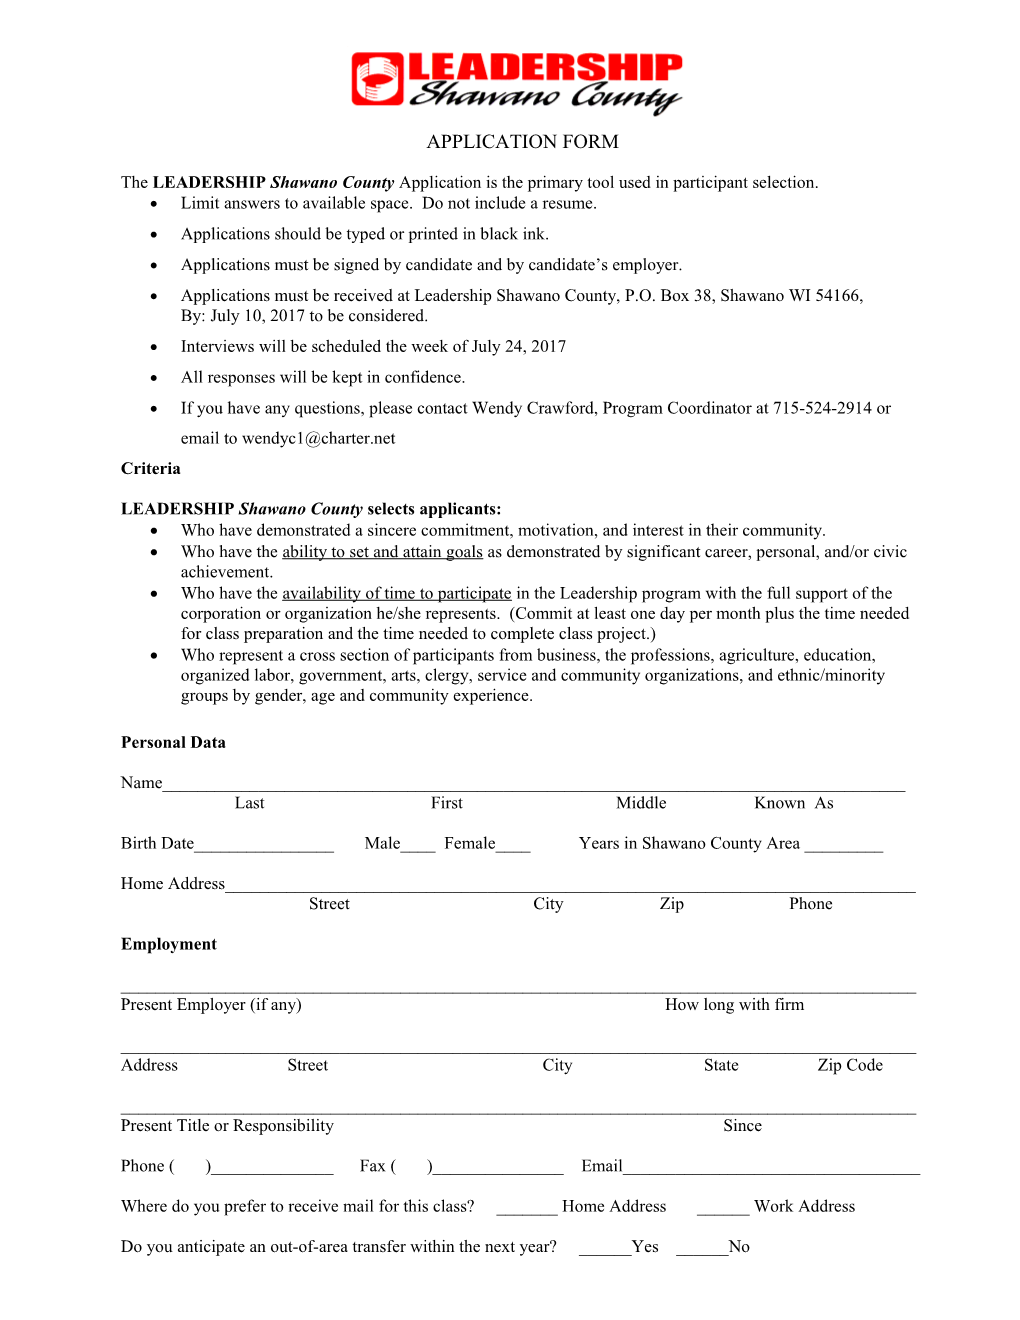 The LEADERSHIP Shawano County Application Is the Primary Tool Used in Participant Selection